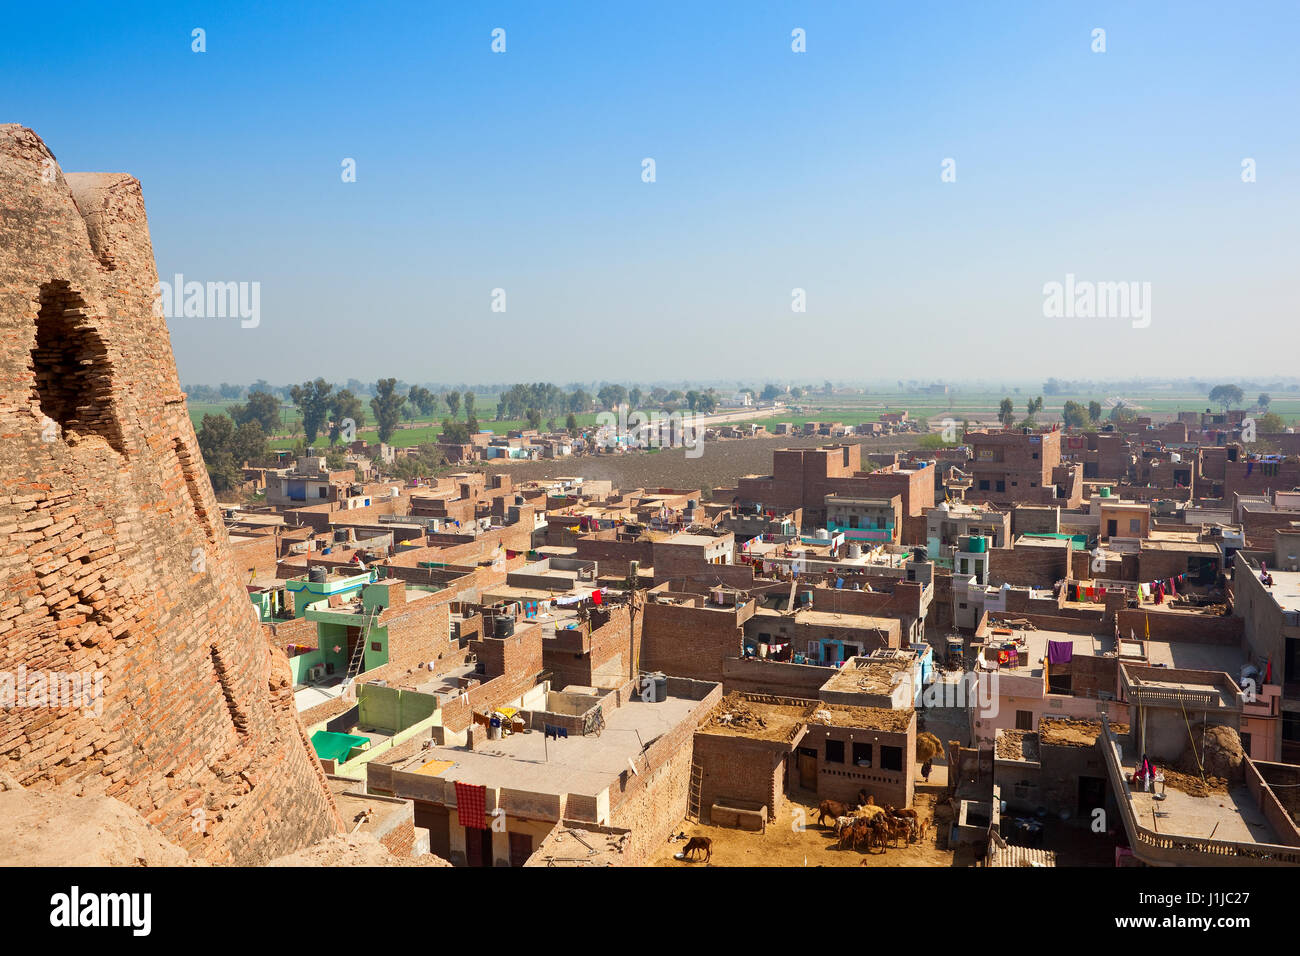 daily activities in the suburbs of hanumangarh city viewed from the restored walls of bhatner fort rajasthan with surrounding farmland under a blue sk Stock Photo